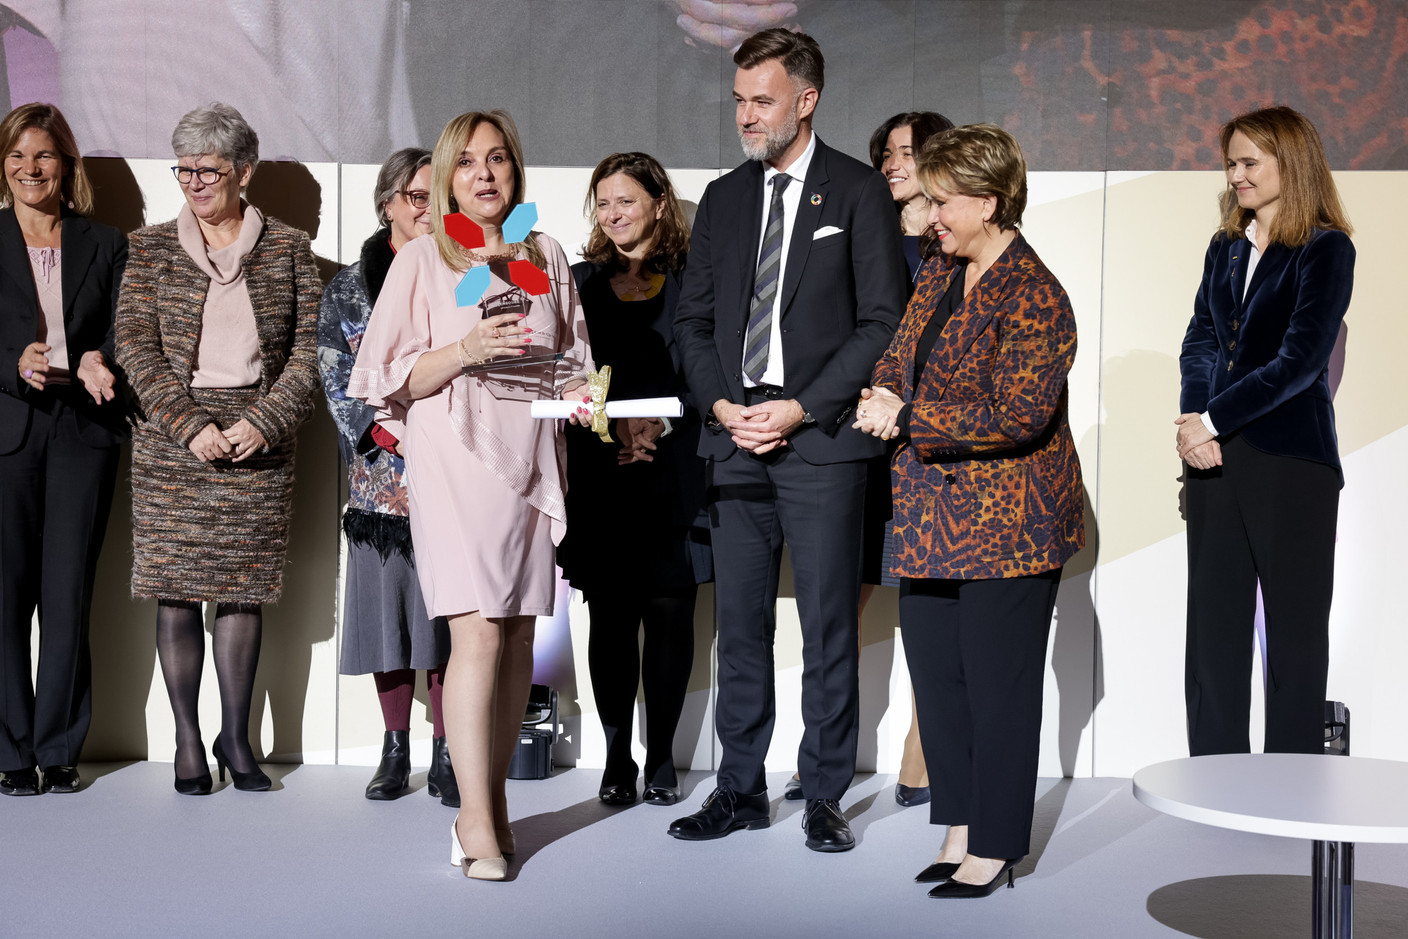 Day 2: Banco FIE represented by its President, Ximena Behoteguy, receiving the award from Her Royal Highness the Grand Duchess and President of the High Jury with members of the selection committee on stage    InFiNe.lu